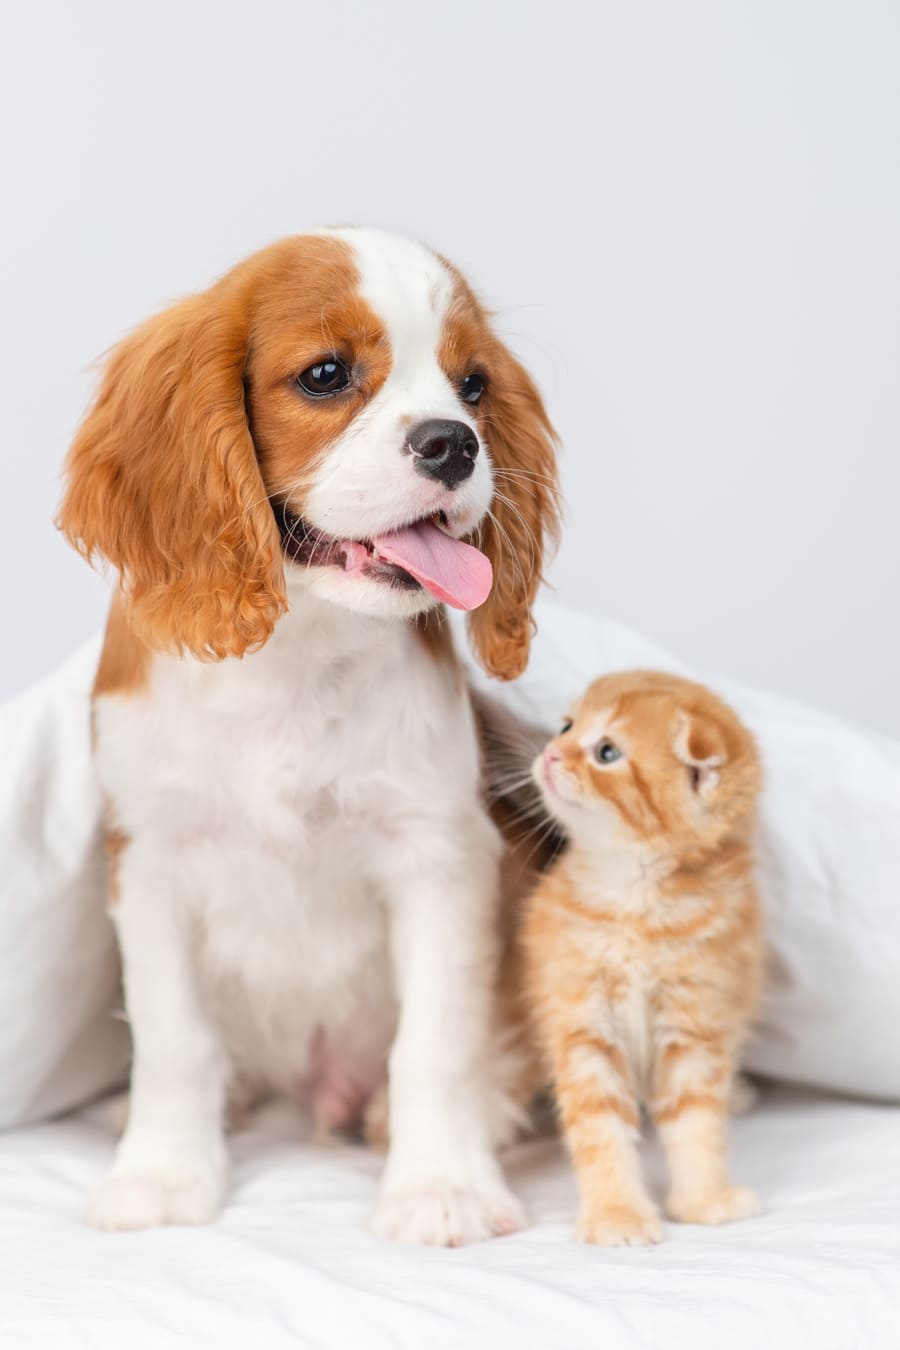 Puppy king charles spaniel sitting on the bed next to a kitten of the scottish breed and looking at him
